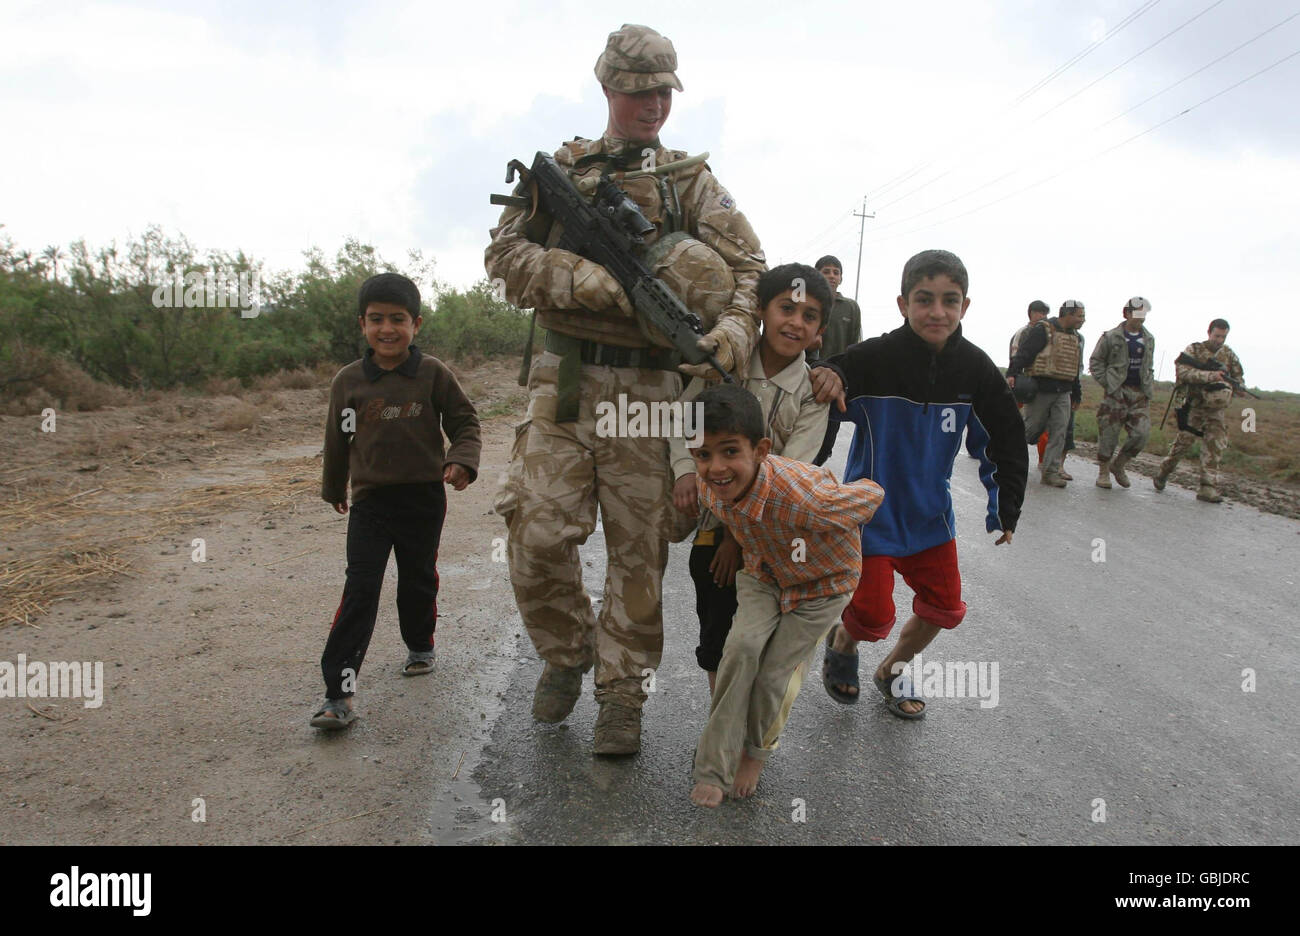 RFM Ruff from Plymouth plays with kids on Leaf Island, Basra province, in the course of an operation to hunt out insurgents who fire rockets into the camp at Basra air base. Stock Photo